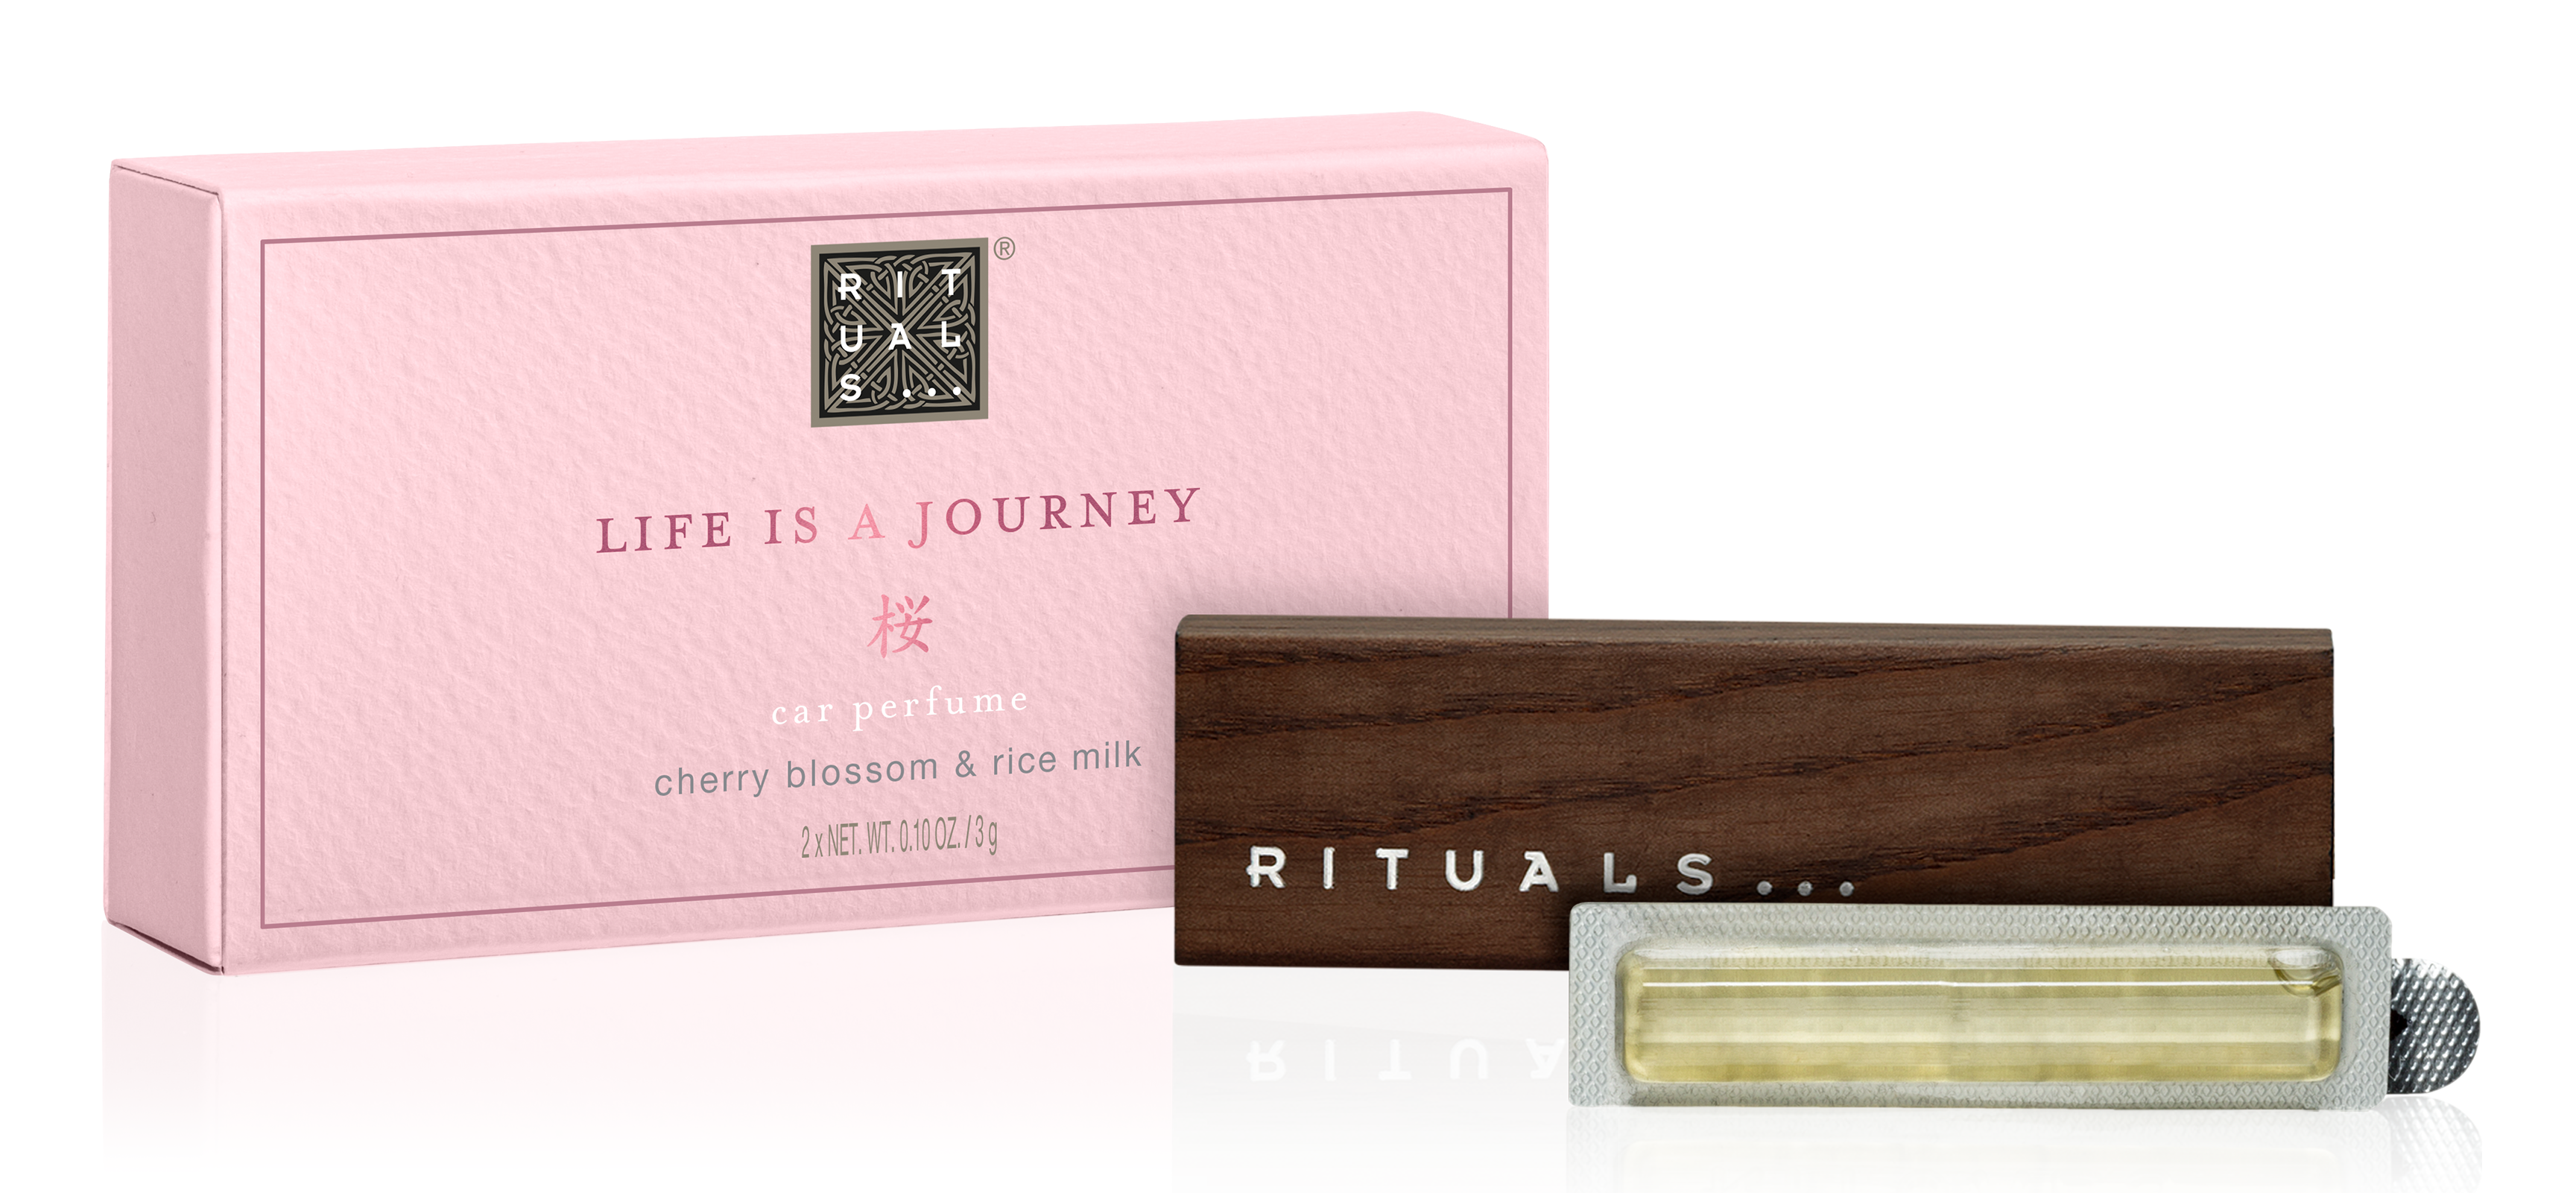 Rituals Sport Life is a Journey – Car Perfume 6 g